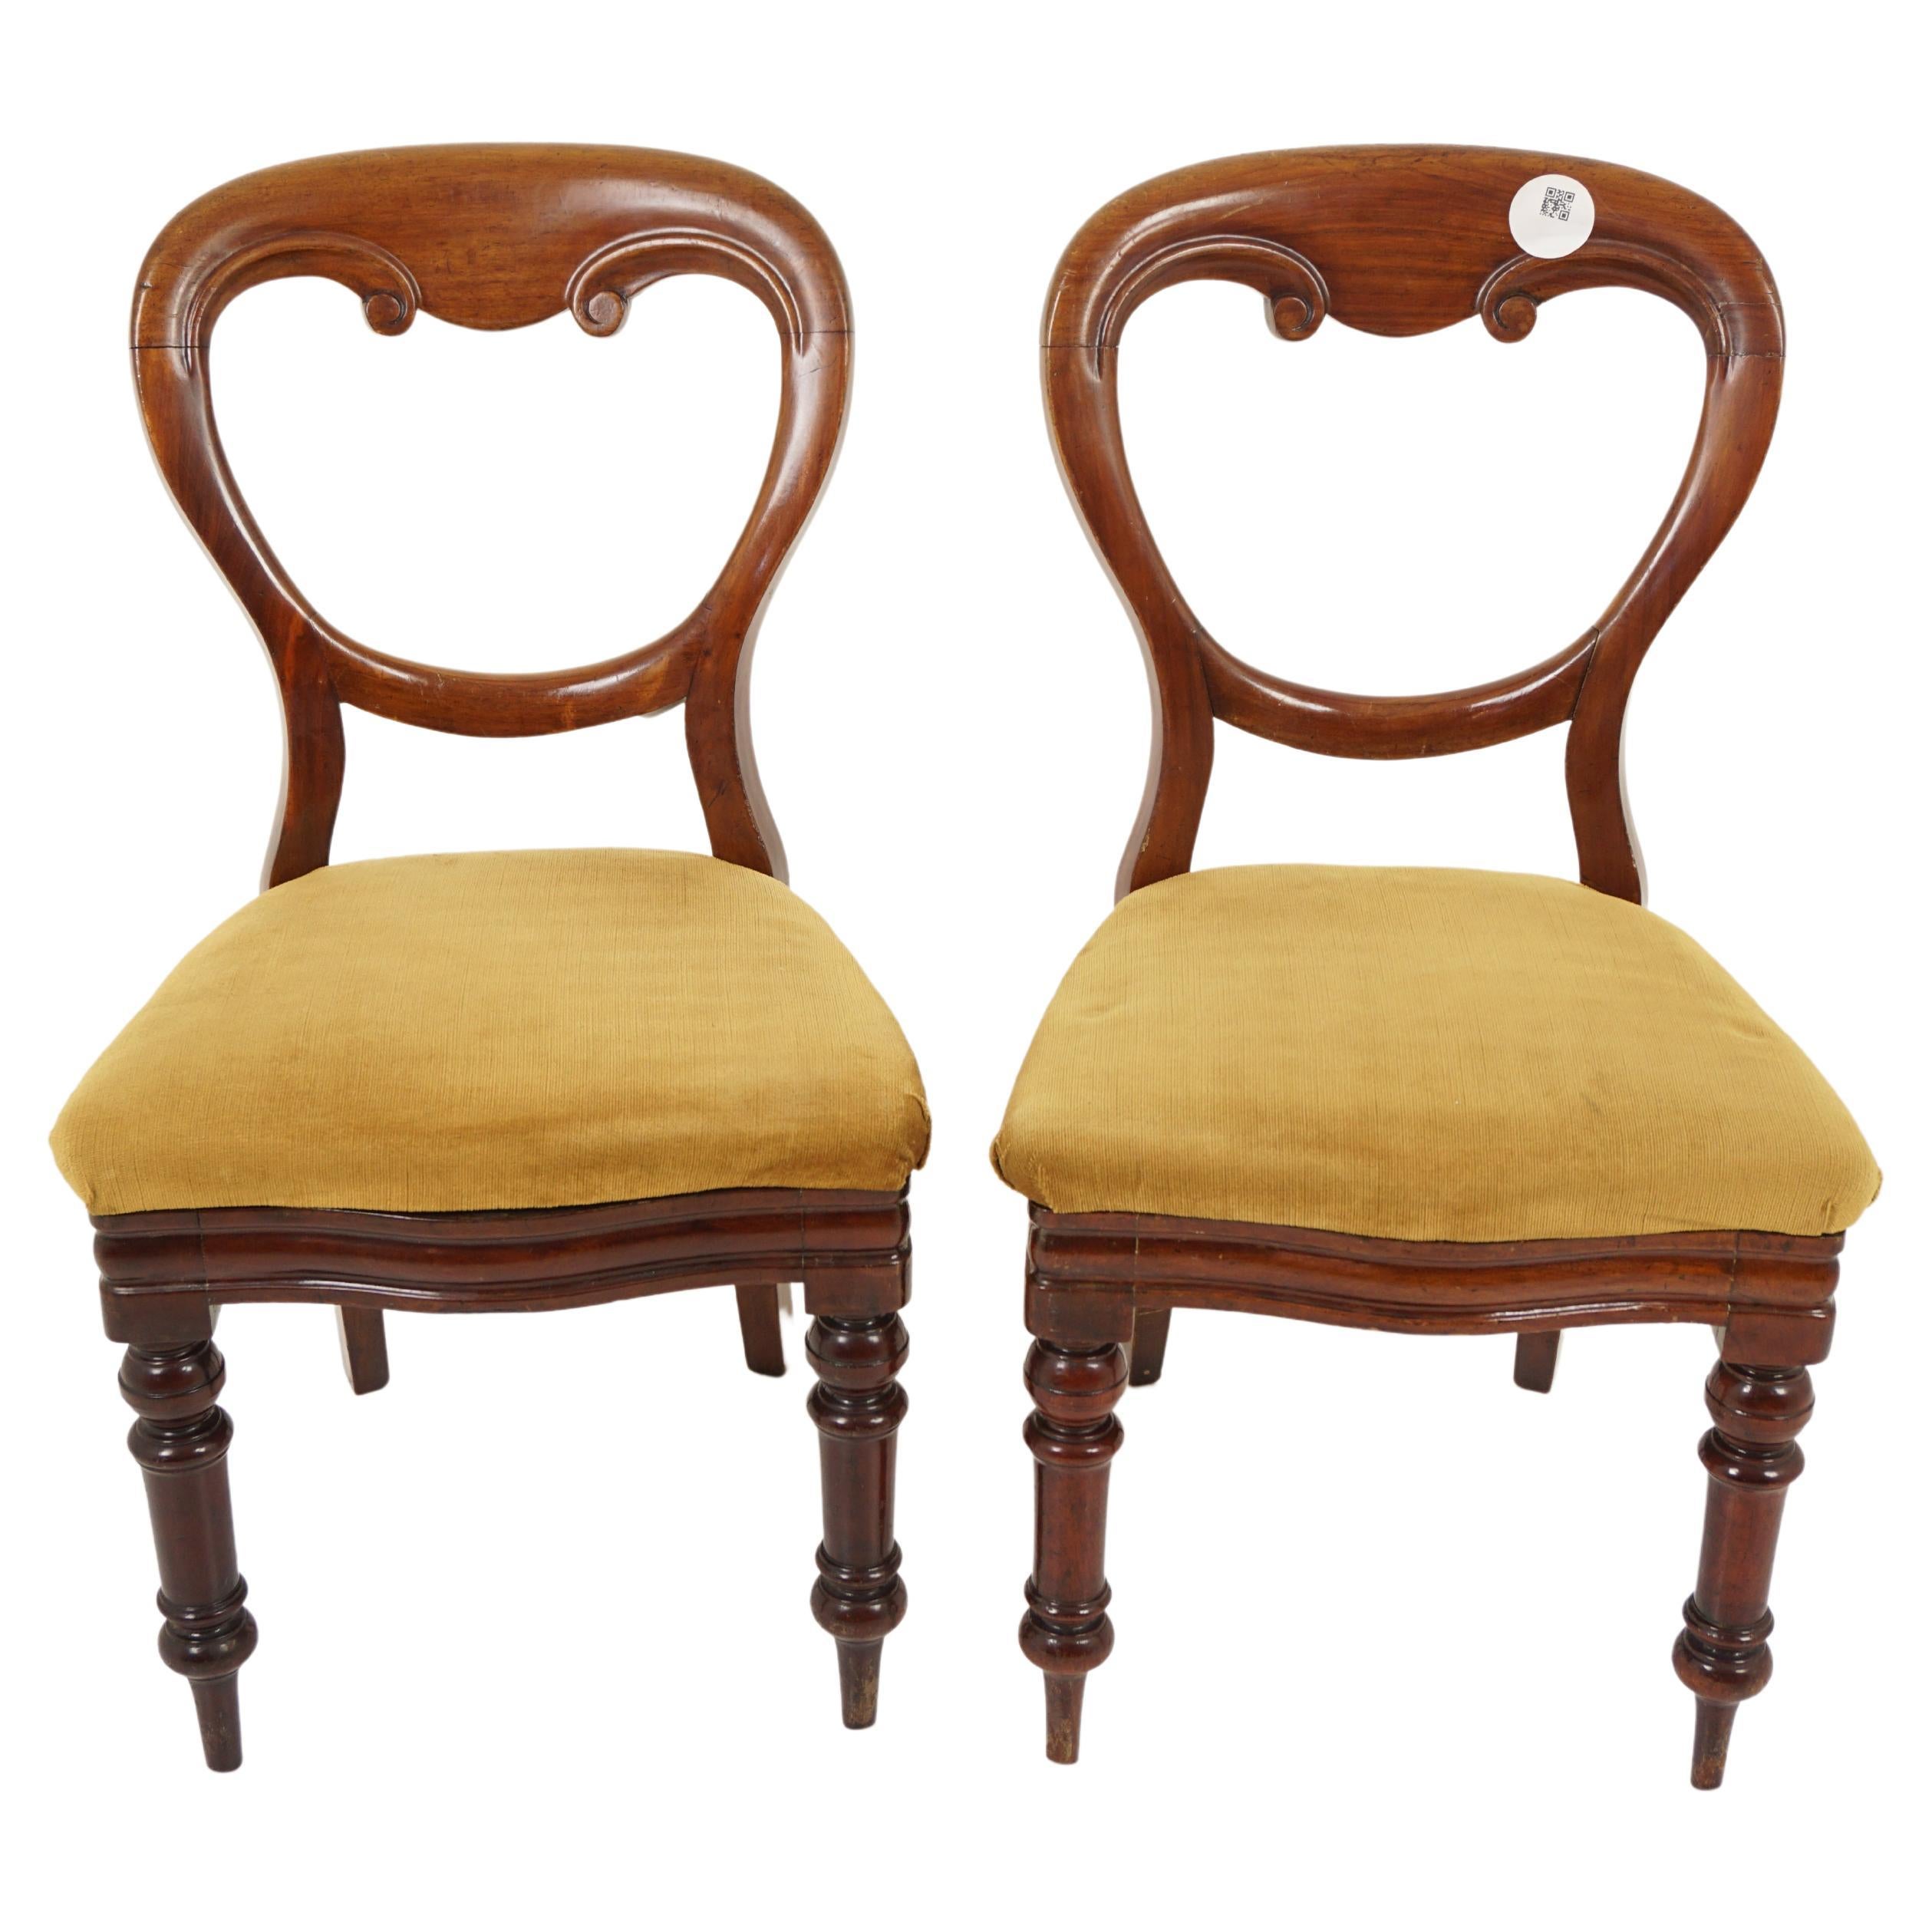 Antique Walnut Chairs, Pair of Victorian Dining Chairs, Scotland 1880, H1132 For Sale